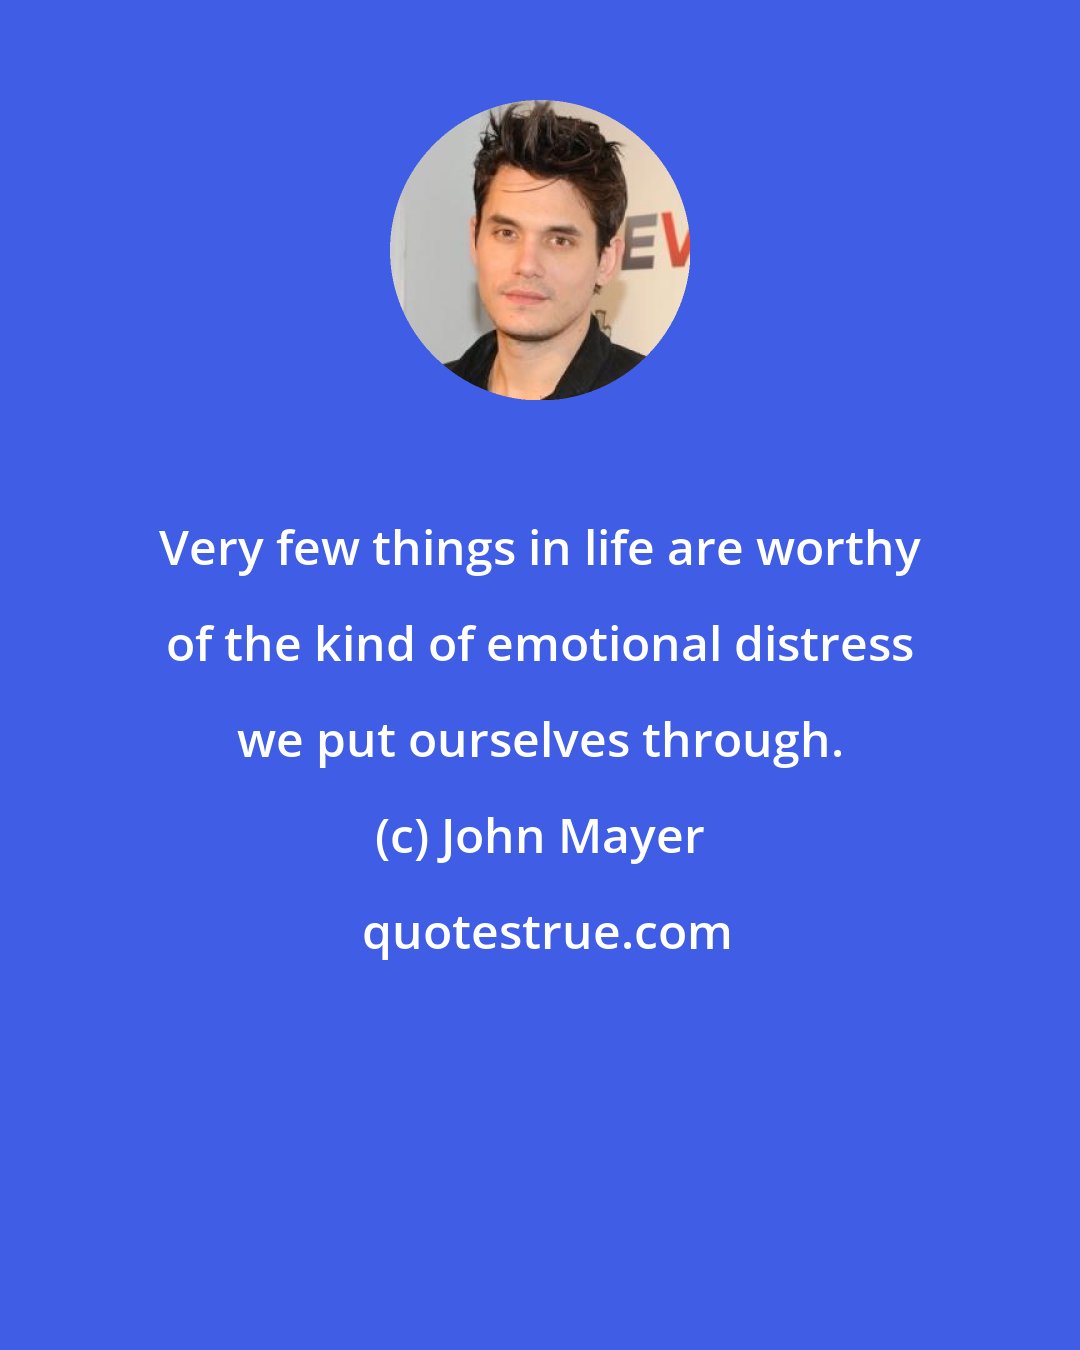 John Mayer: Very few things in life are worthy of the kind of emotional distress we put ourselves through.